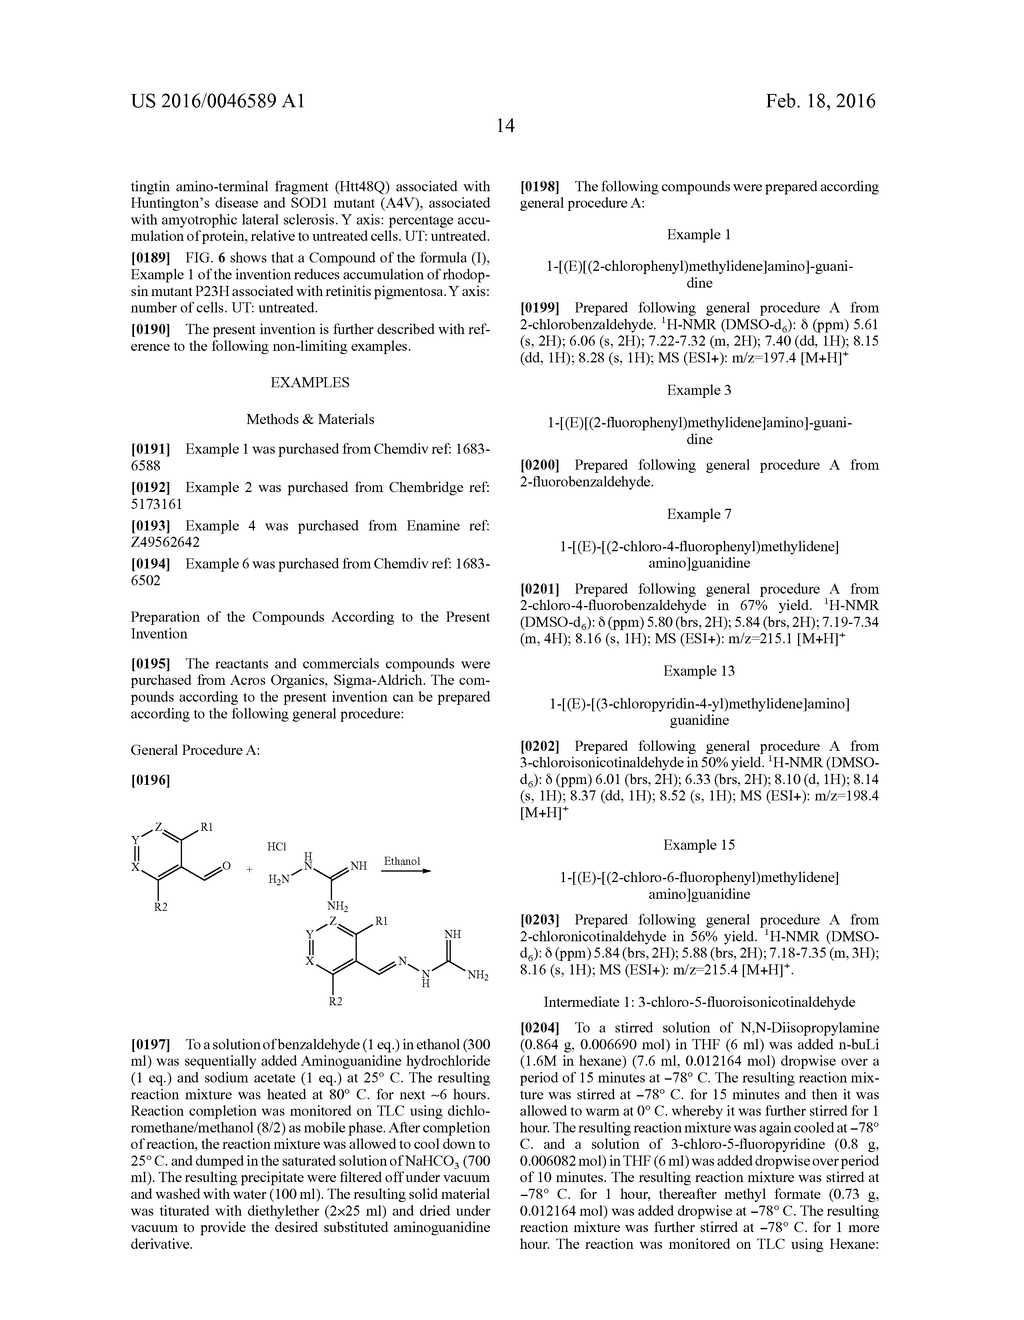 Benzylideneguanidine Derivatives and Therapeutic Use for the Treatment of     Protein Misfolding Diseases - diagram, schematic, and image 21